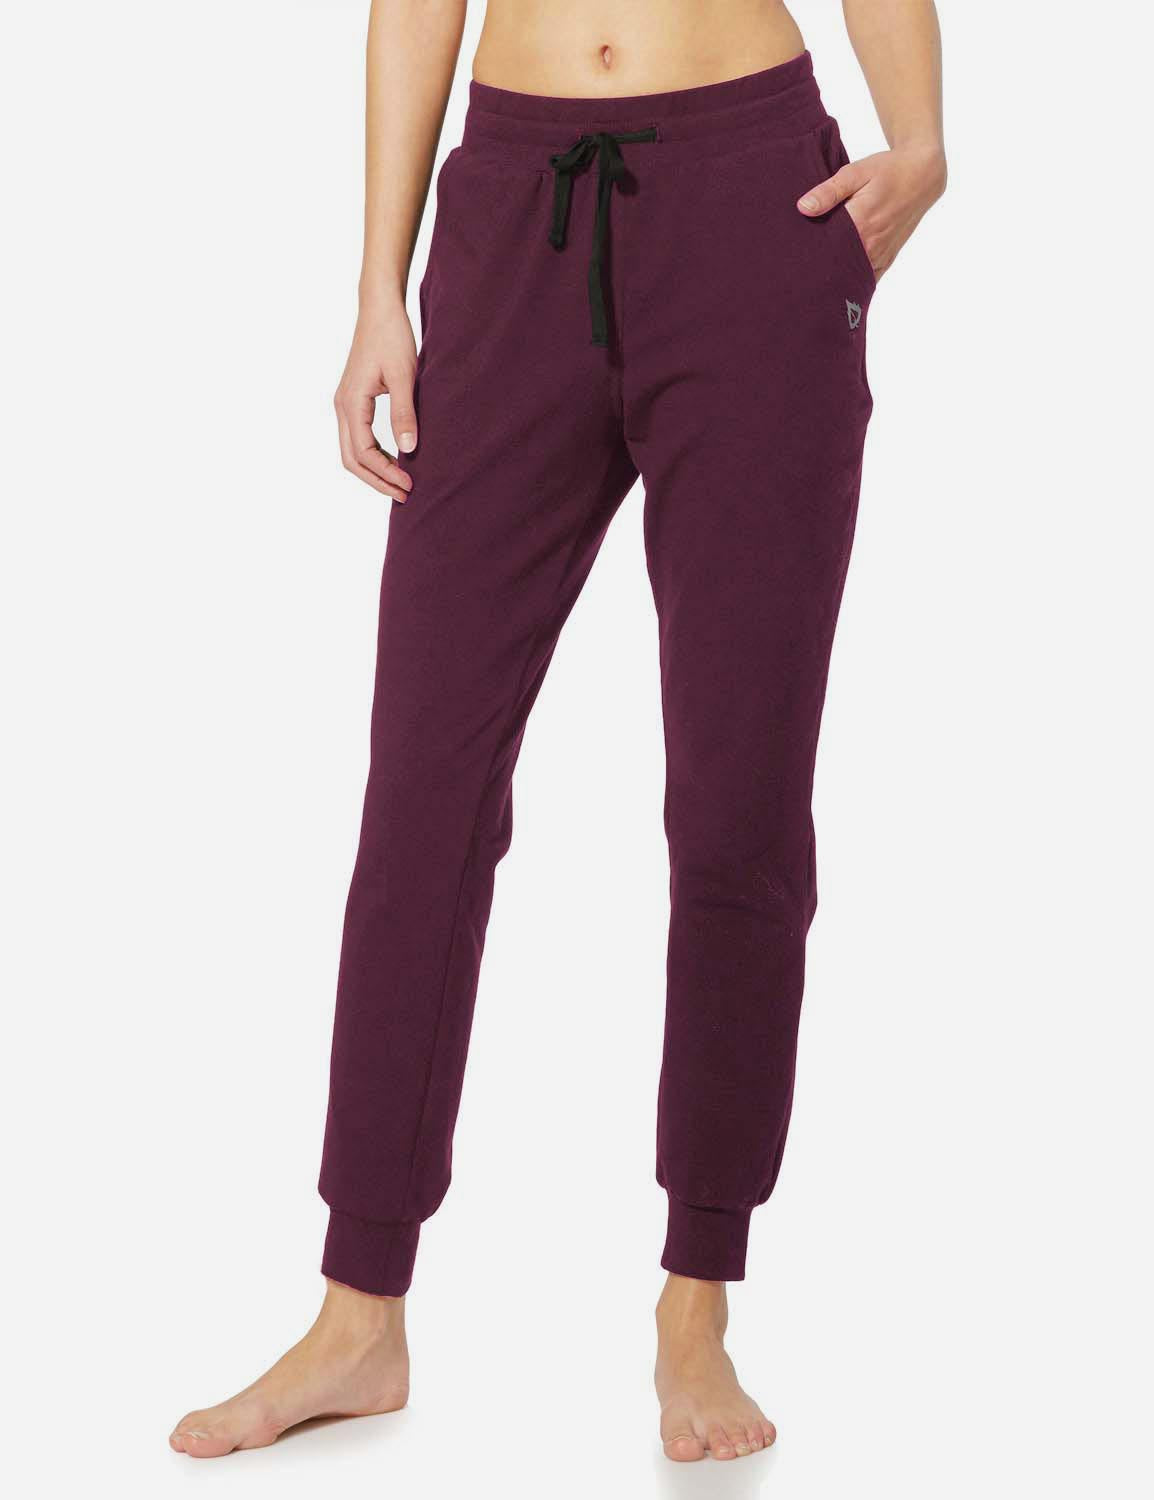 Baleaf Women's Cotton Comfy Pocketed & Tapered Weekend Joggers abh103 Burgundy Side